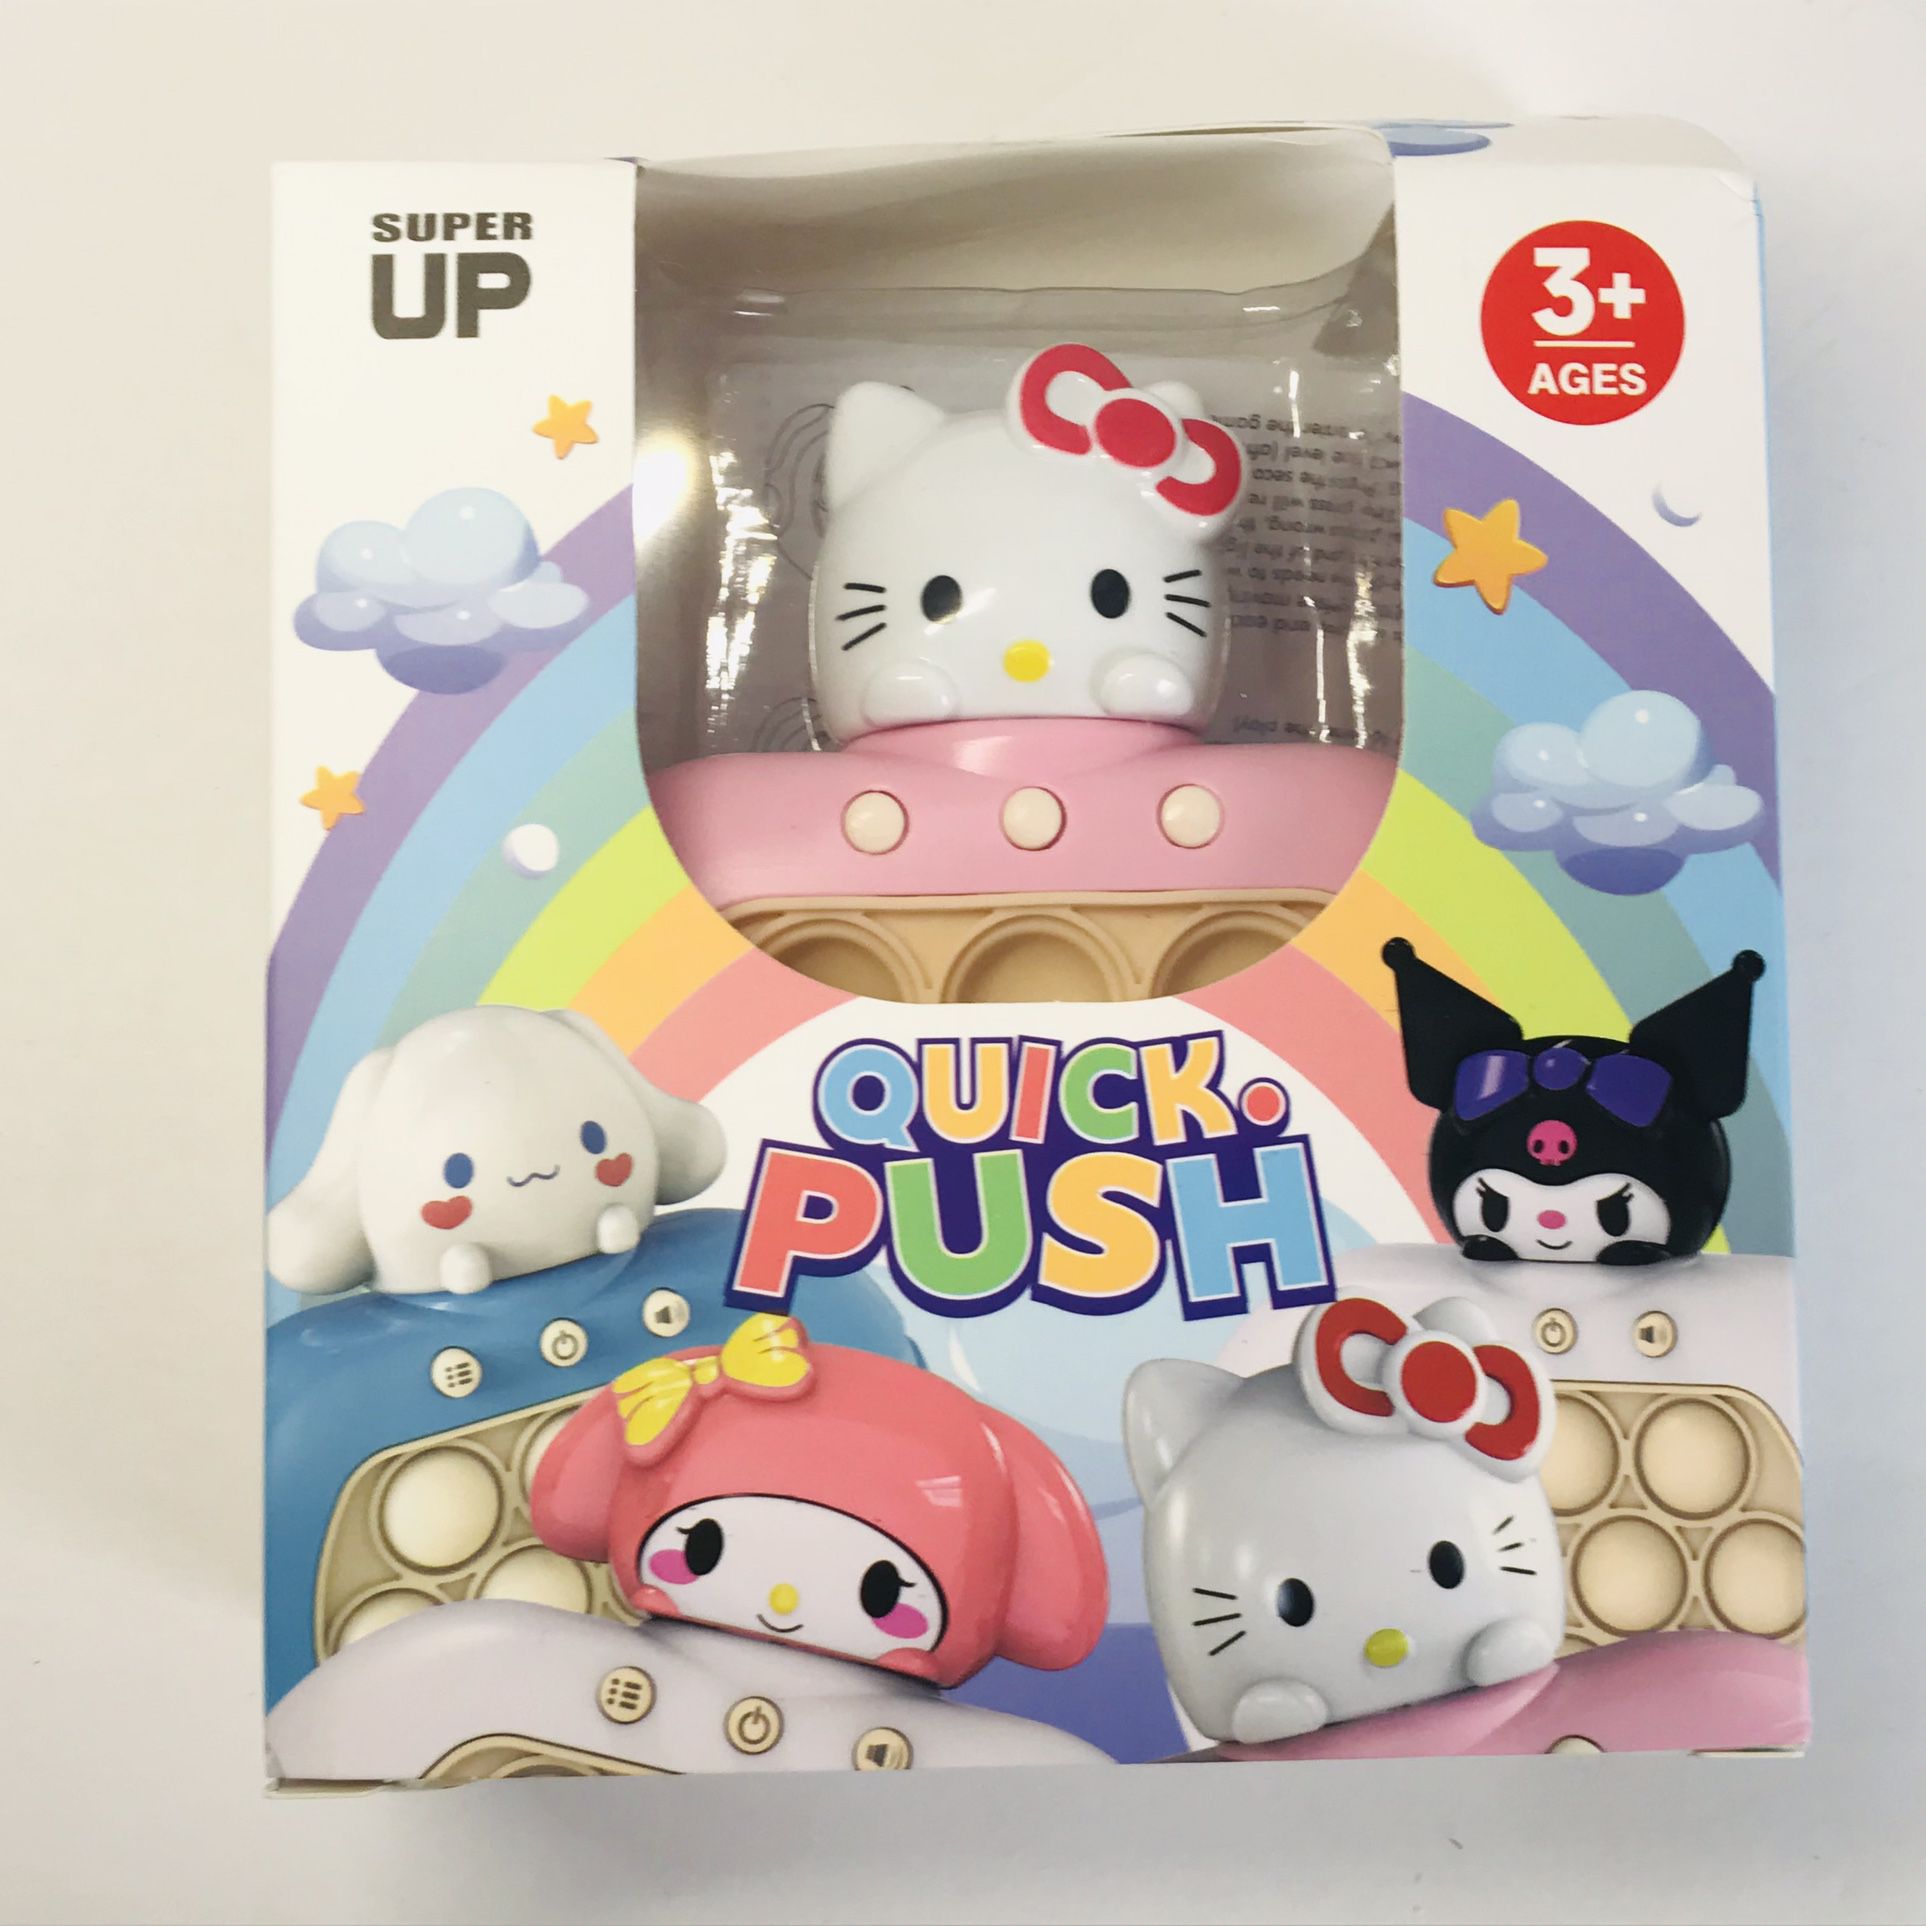 Quick Push 3+ Ages Handheld Pop Toy Leisure Entertainment Game - Kitty Pink